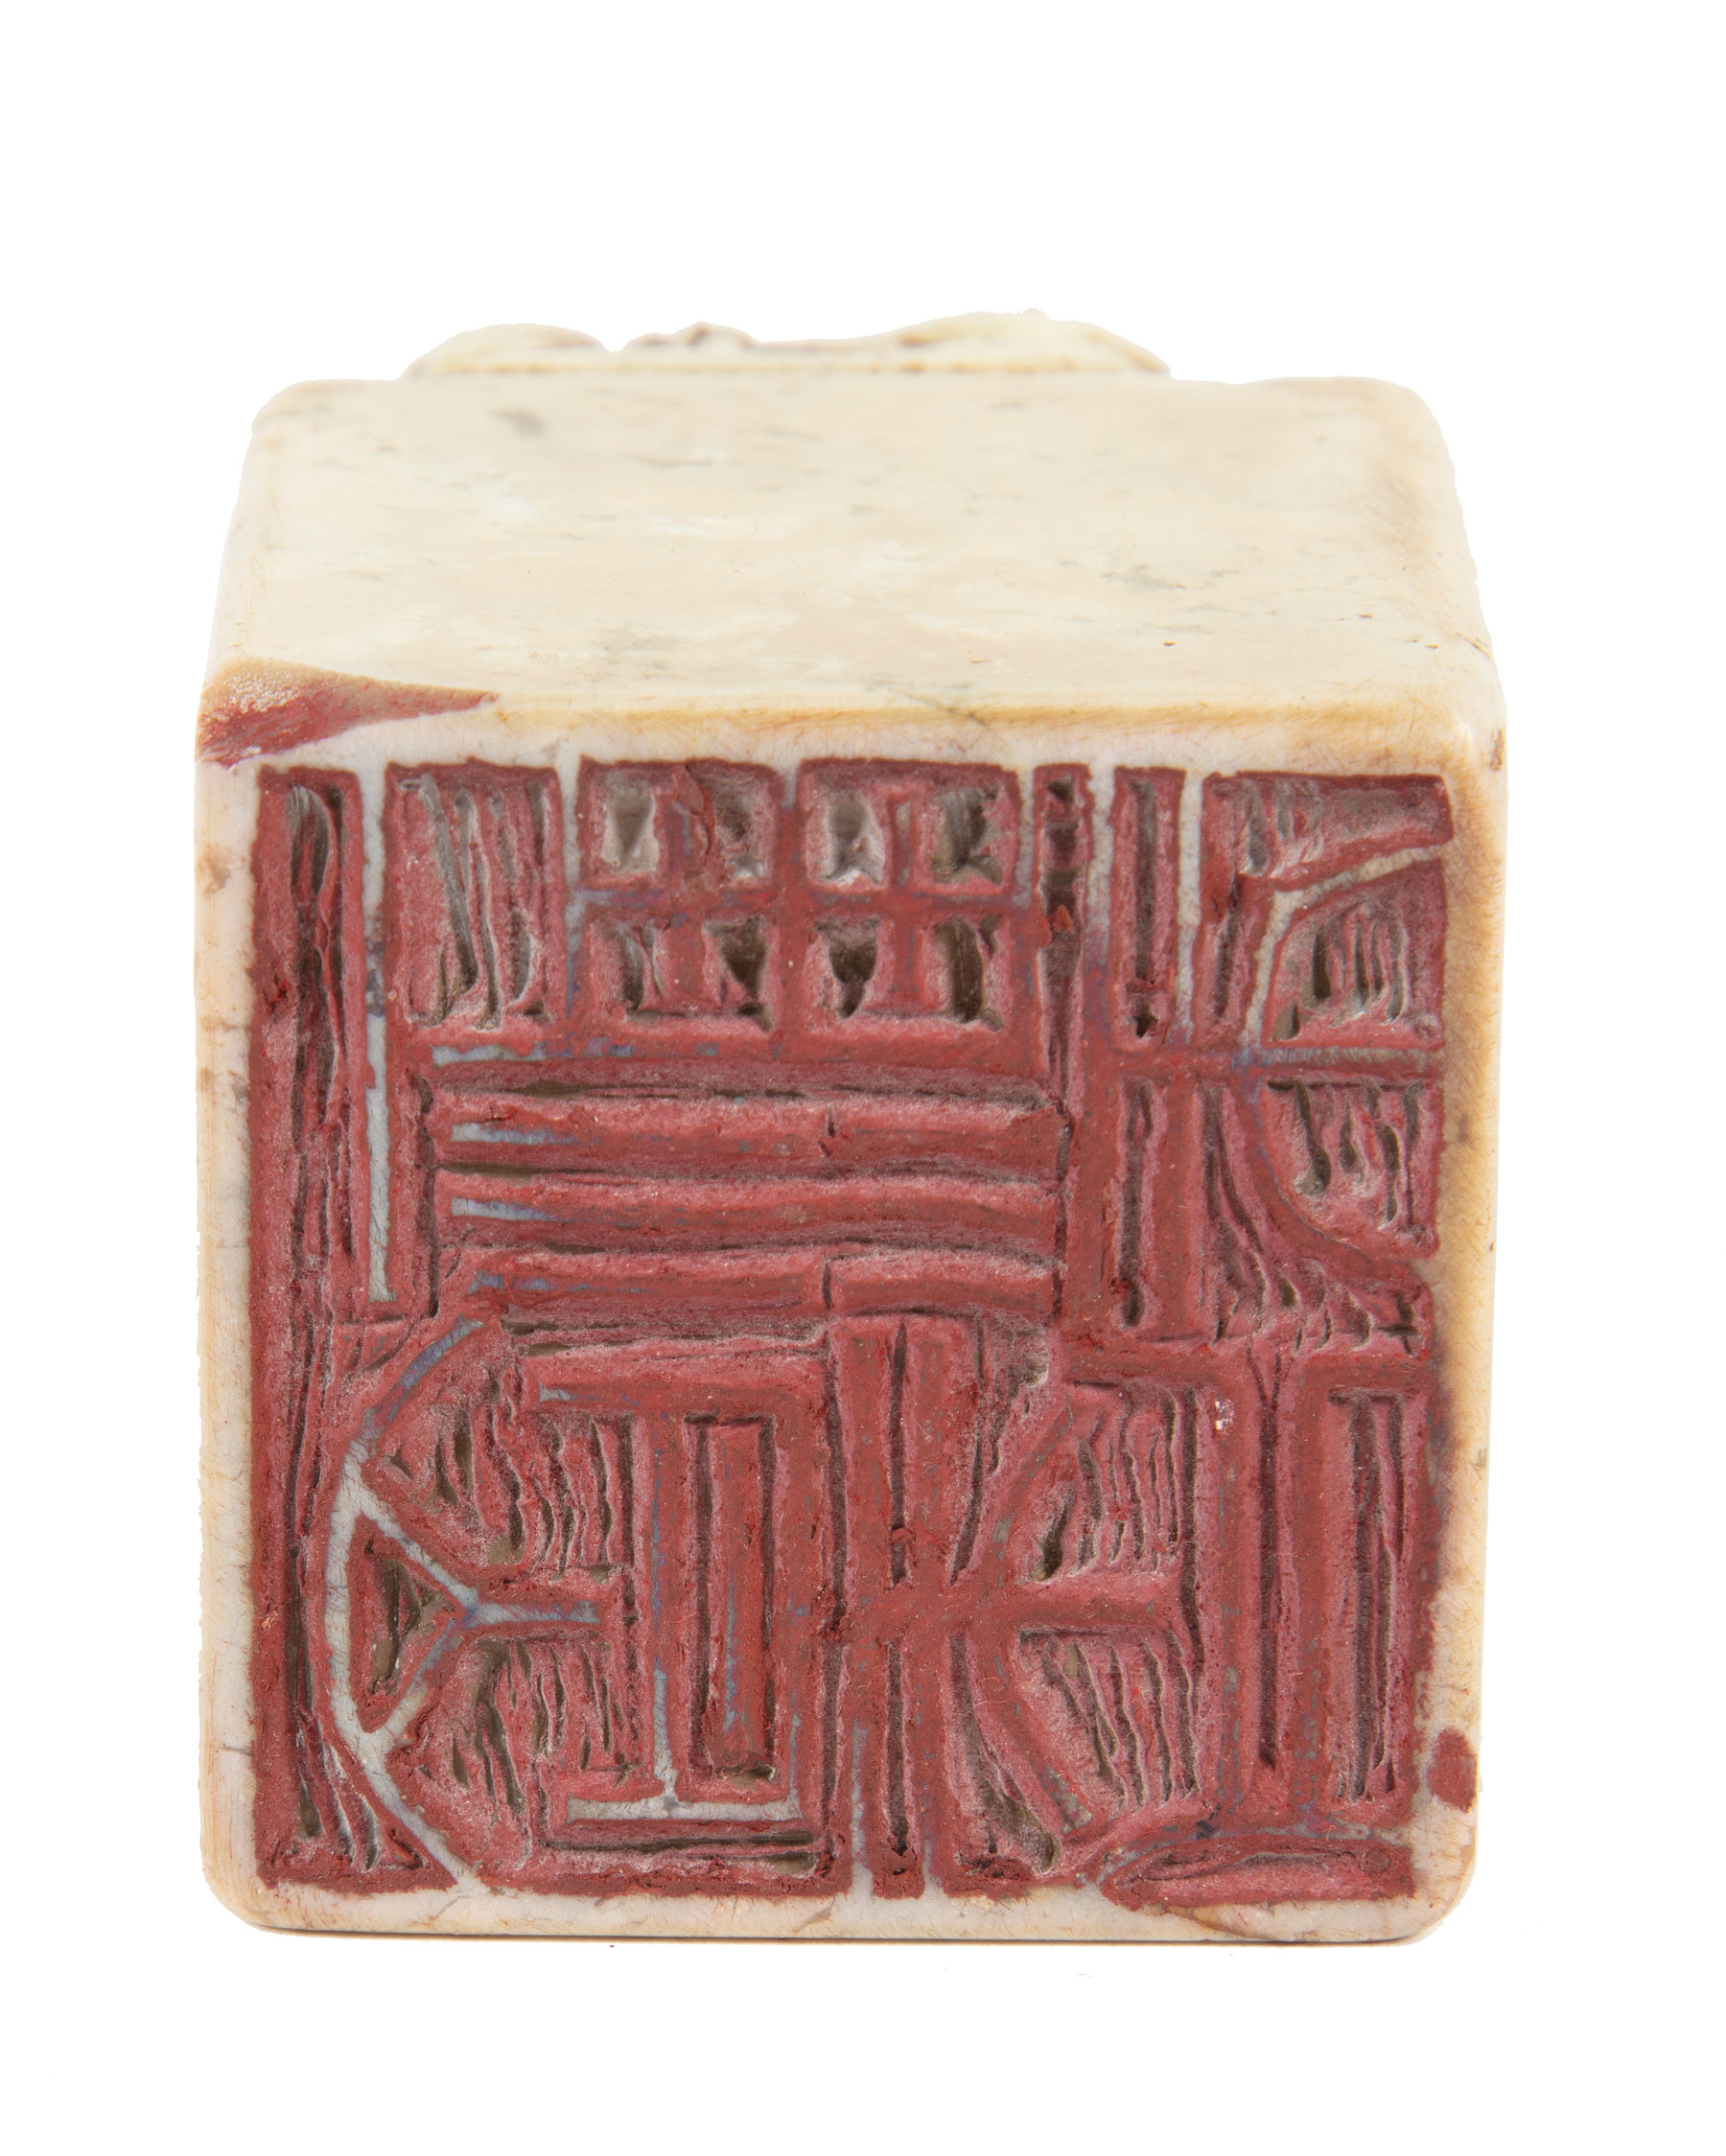 Chinese Soapstone Seal , carved with a Buddhist lion cradling its cub, carved chop, h. 3 1/2 in., w. - Image 3 of 3